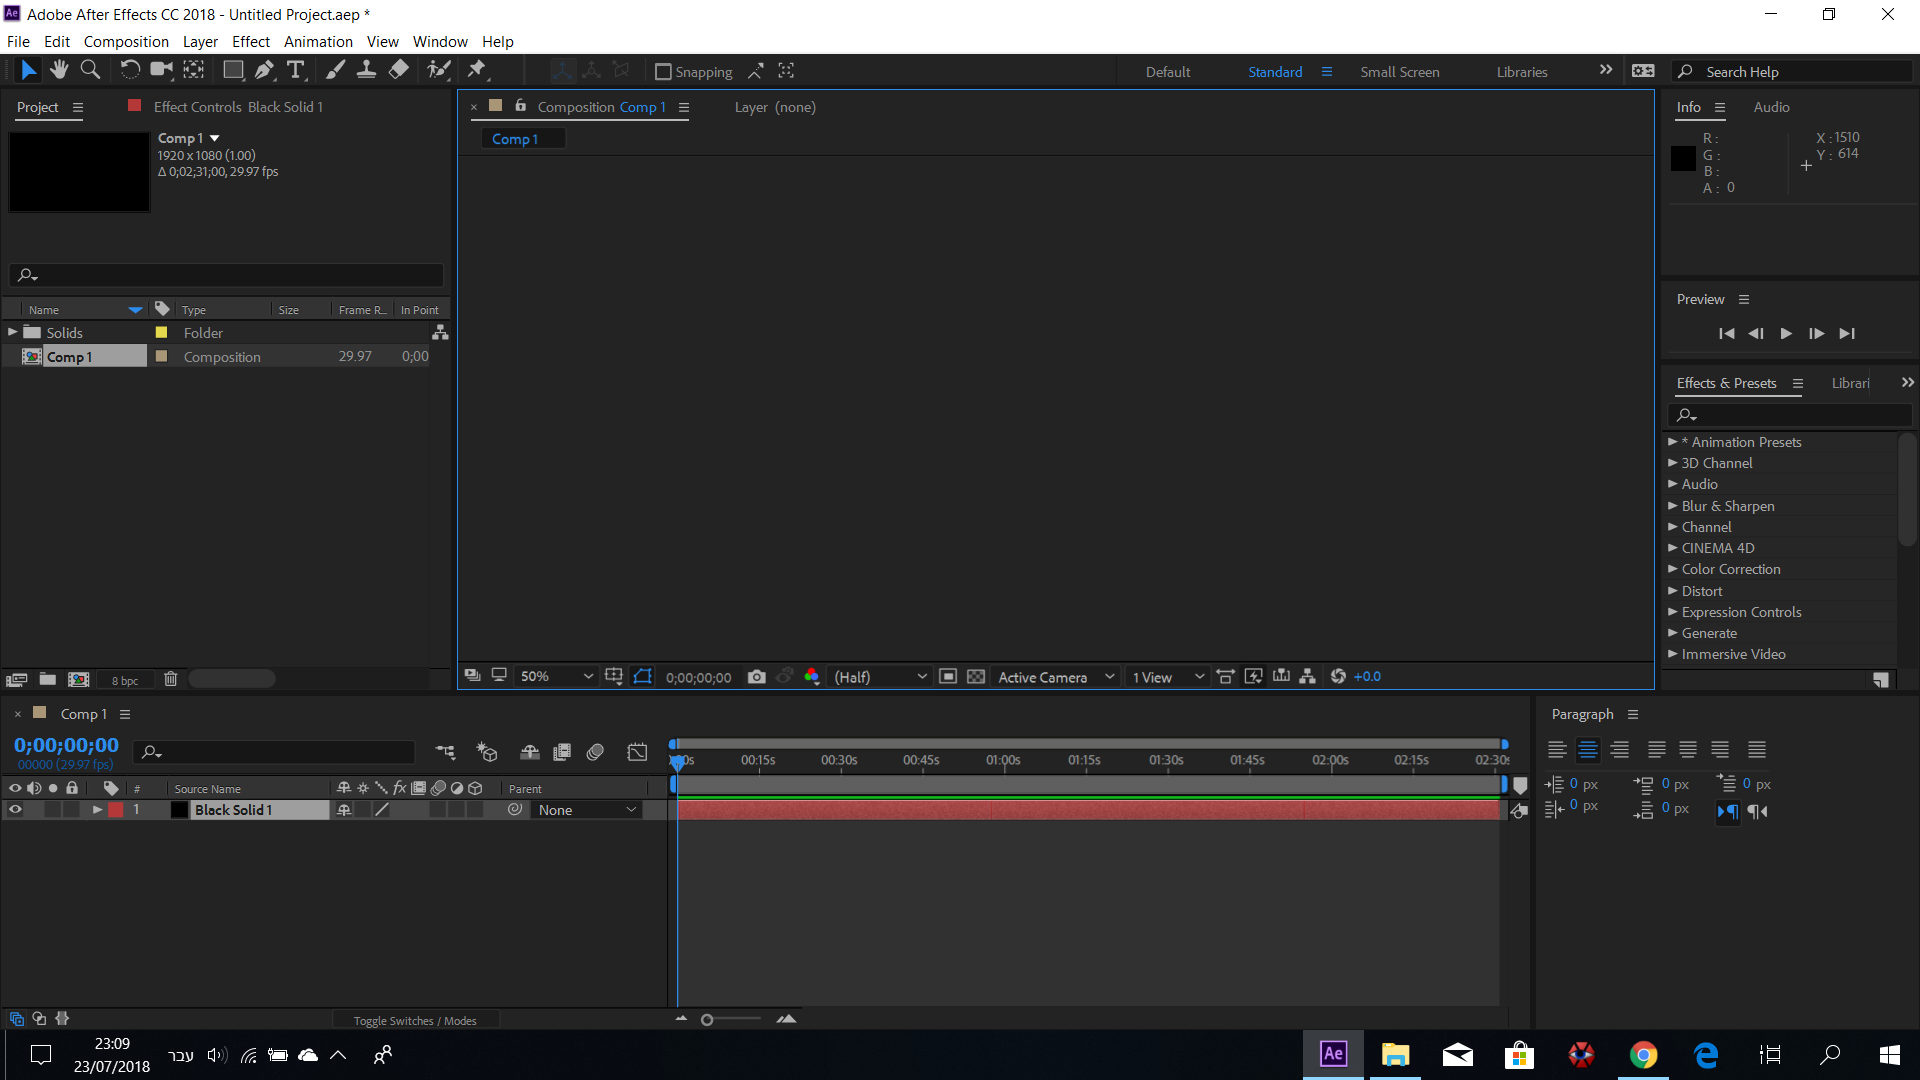 adobe after effects download stuck at 10 percent